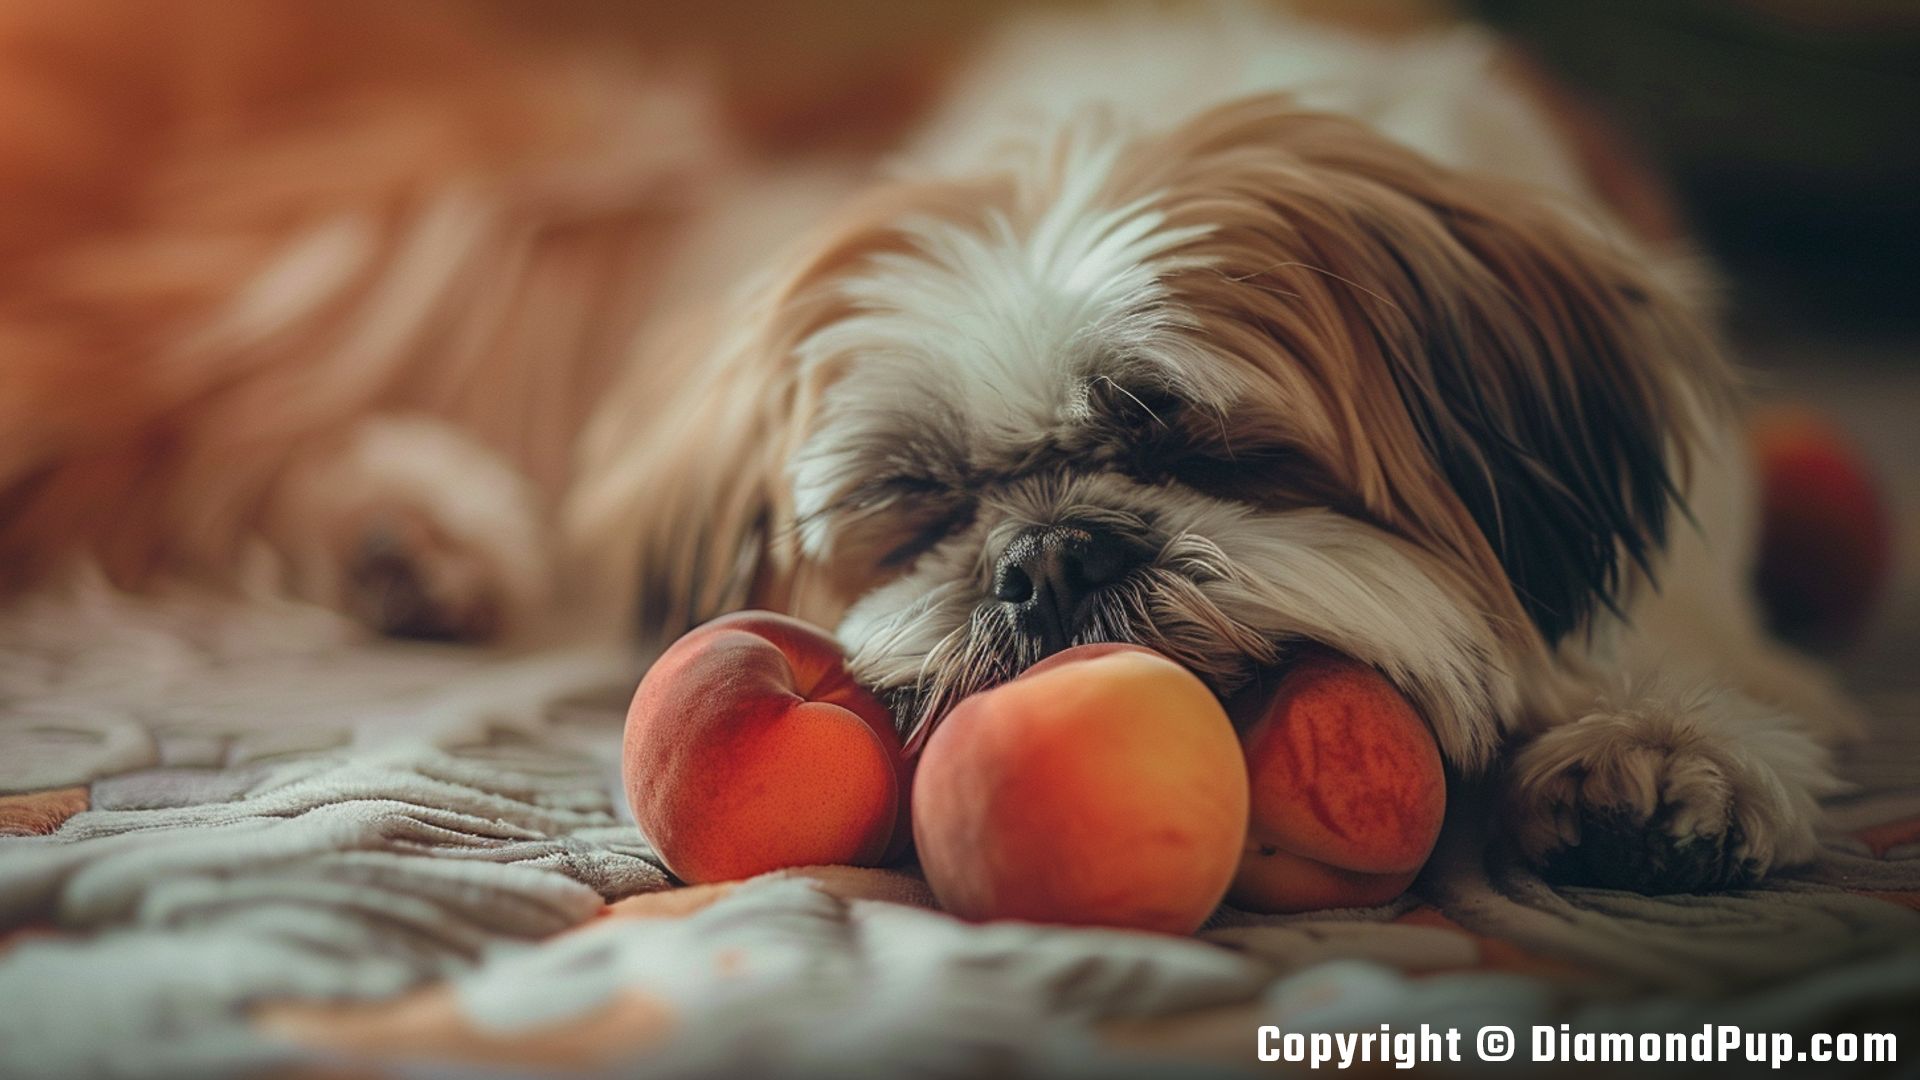 Photograph of a Happy Shih Tzu Snacking on Peaches